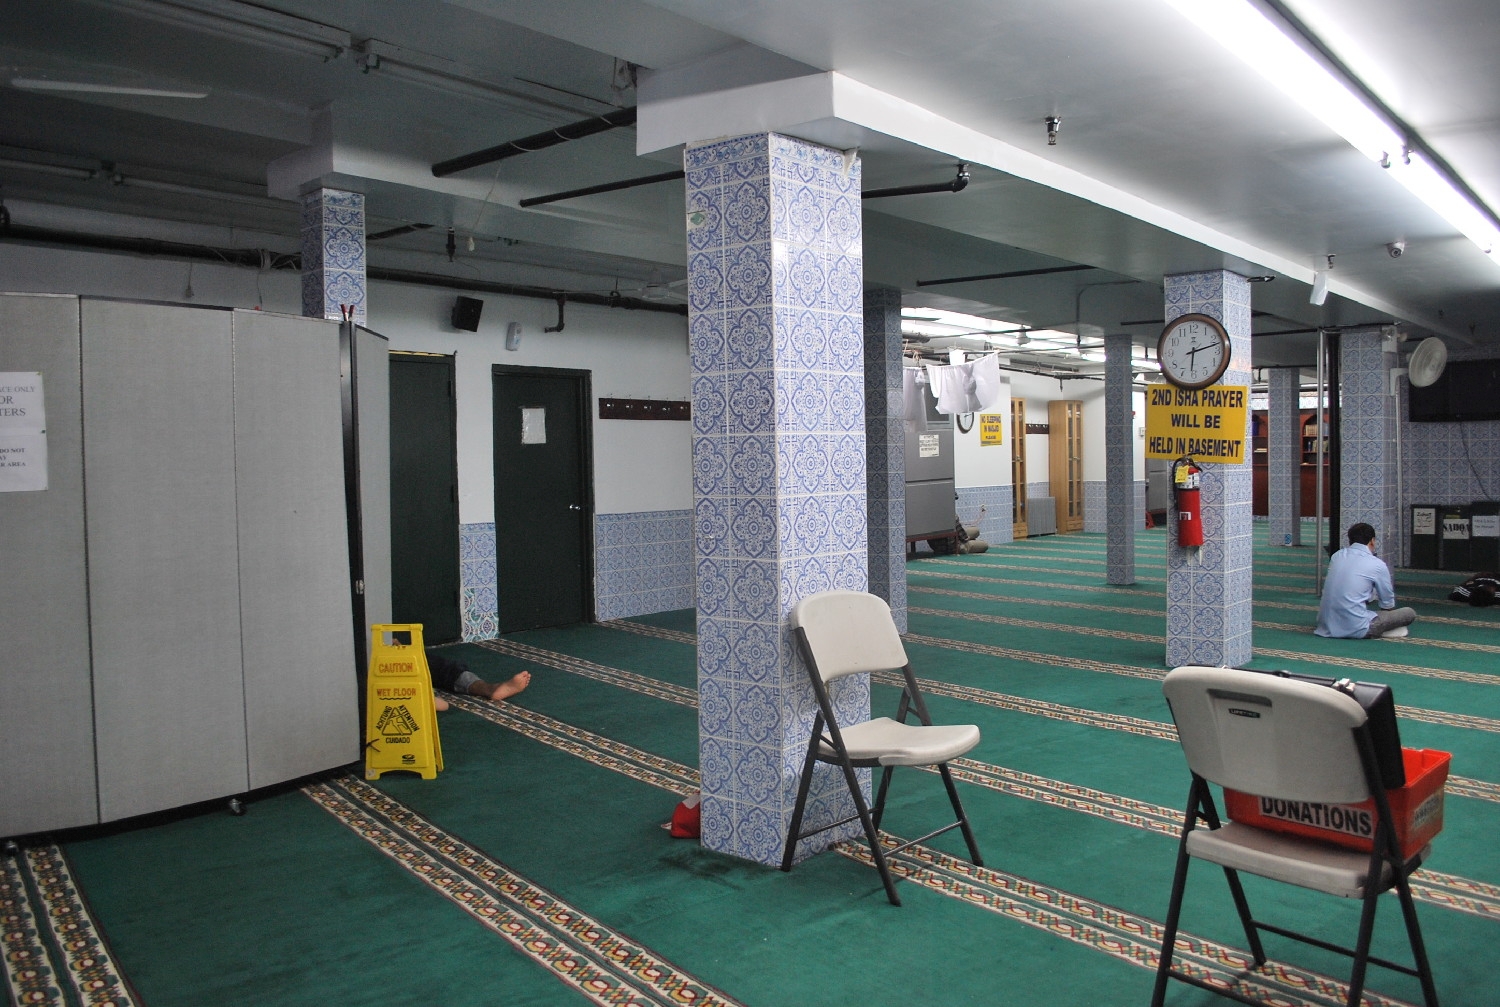 Prayer hall, with partitions for women's area at left